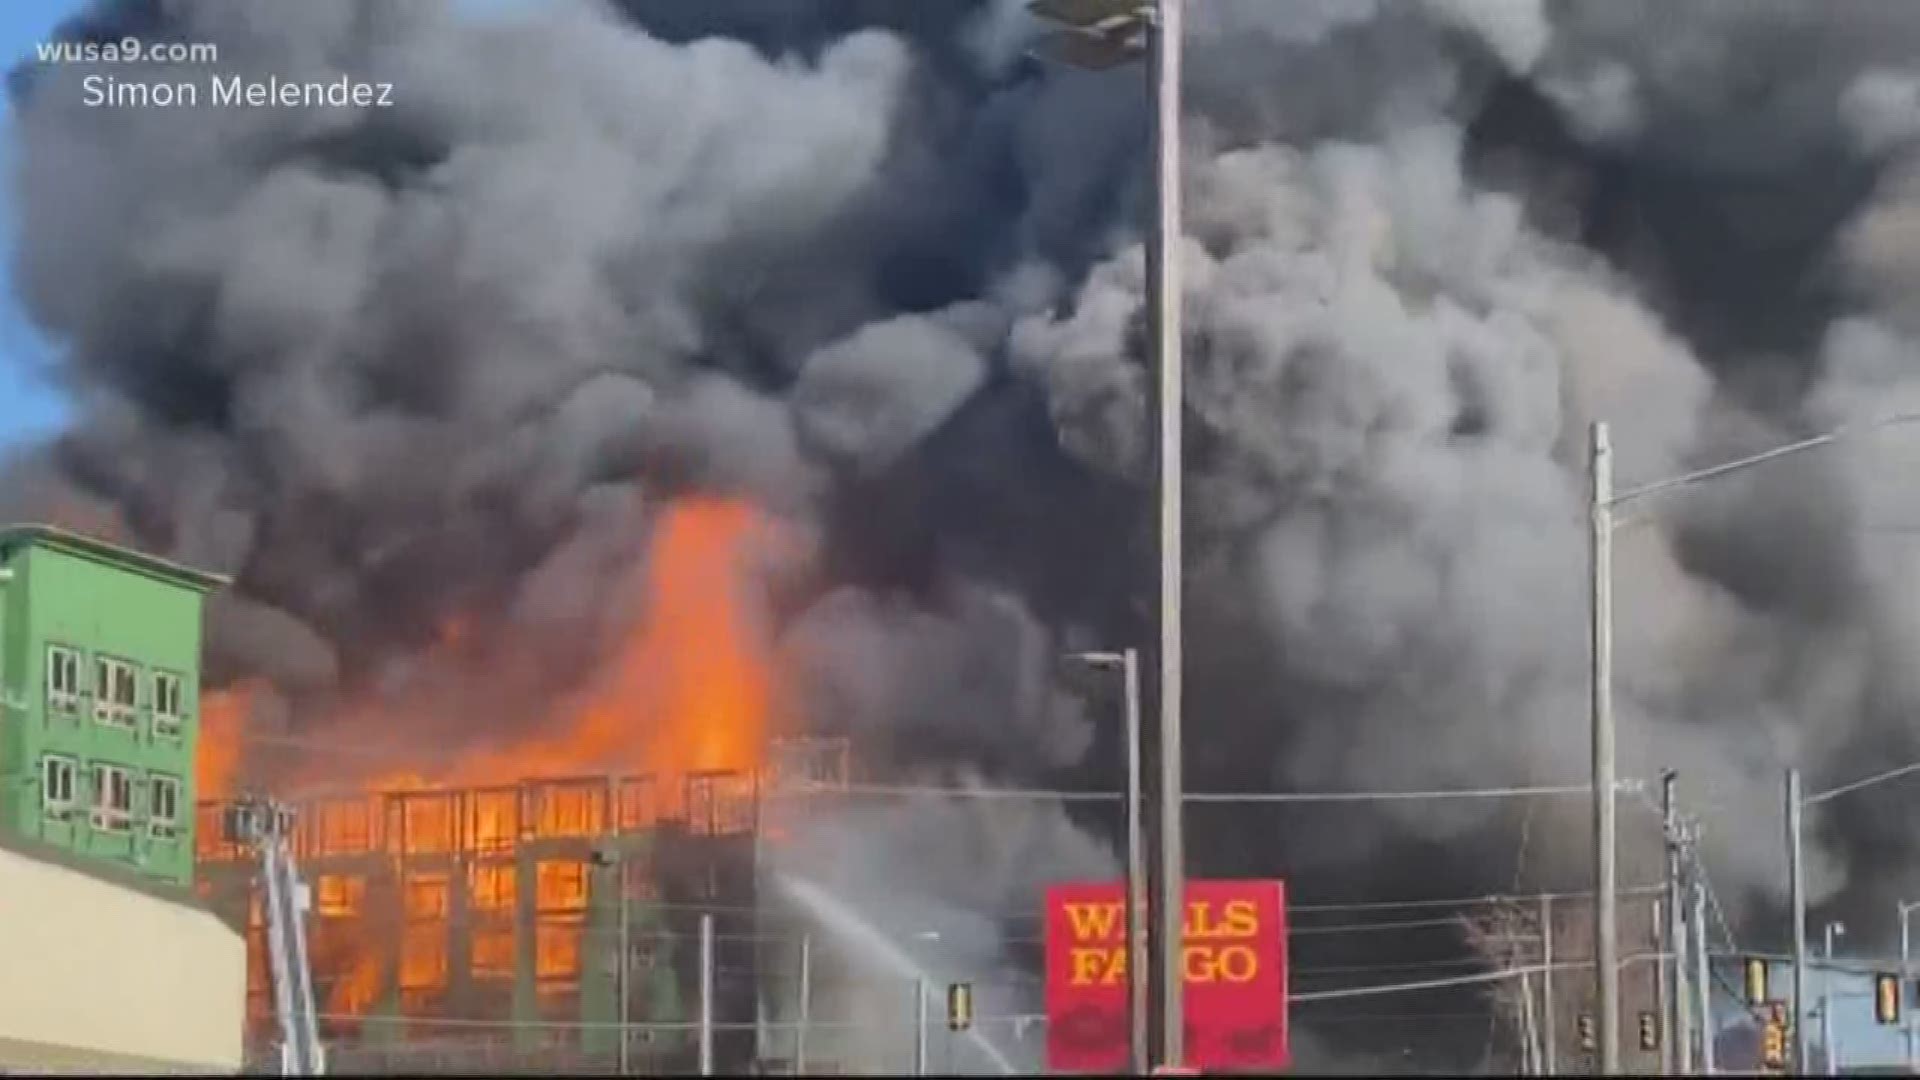 A massive 4-alarm fire broke out near Alexandria on Saturday morning, engulfing the building in huge flames.